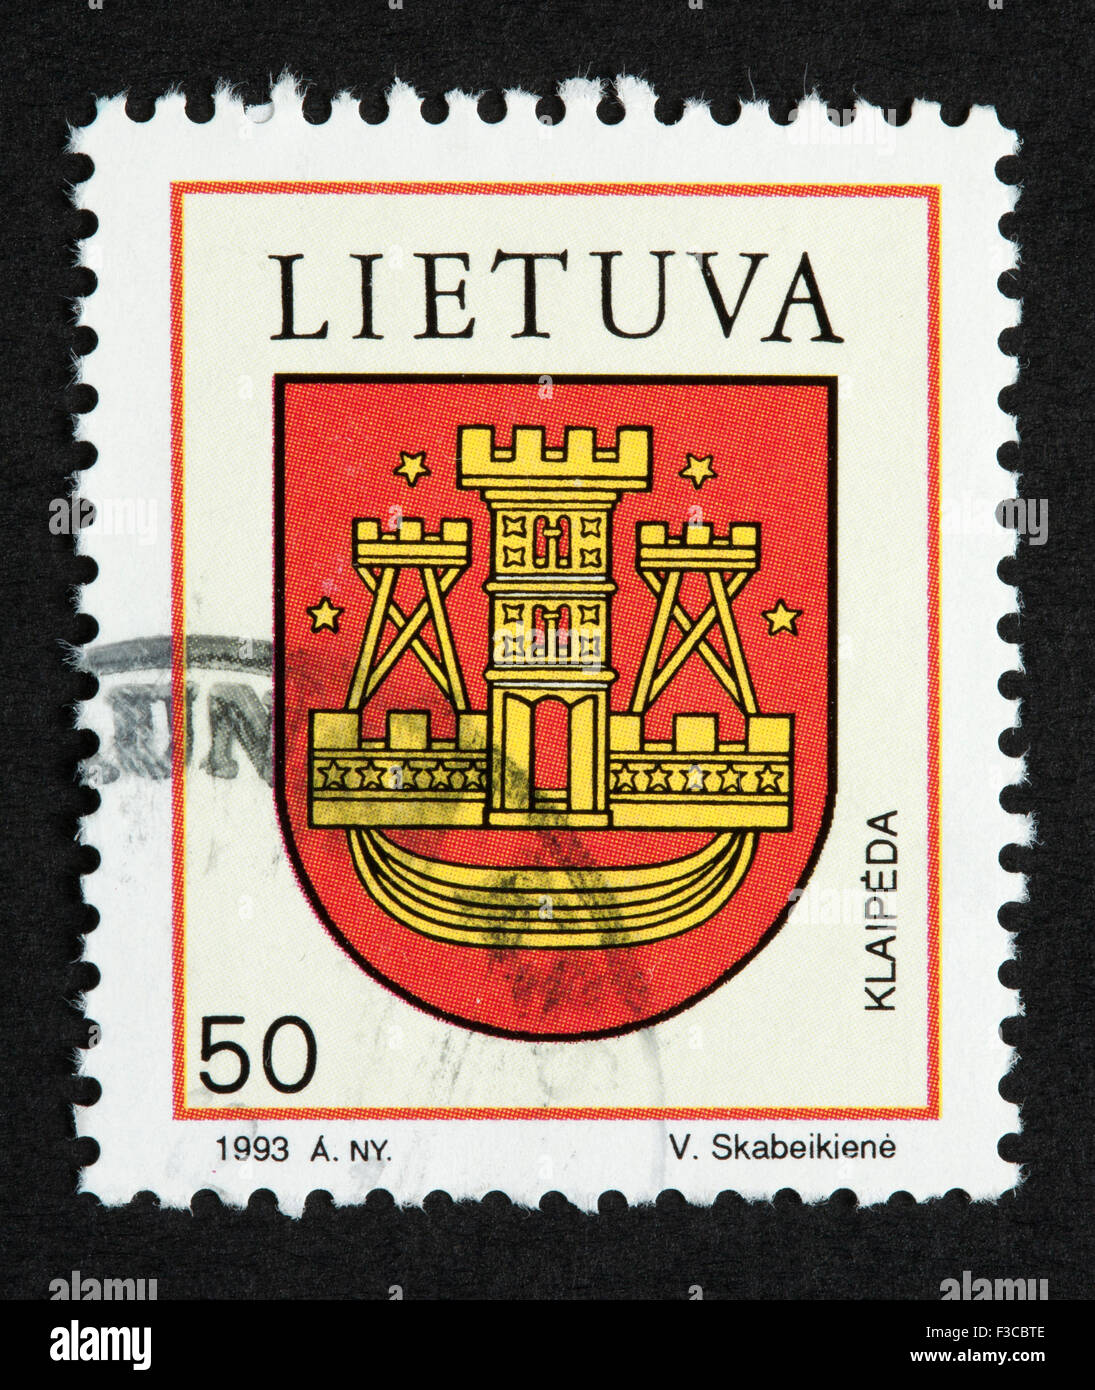 Lithuanian postage stamp Stock Photo